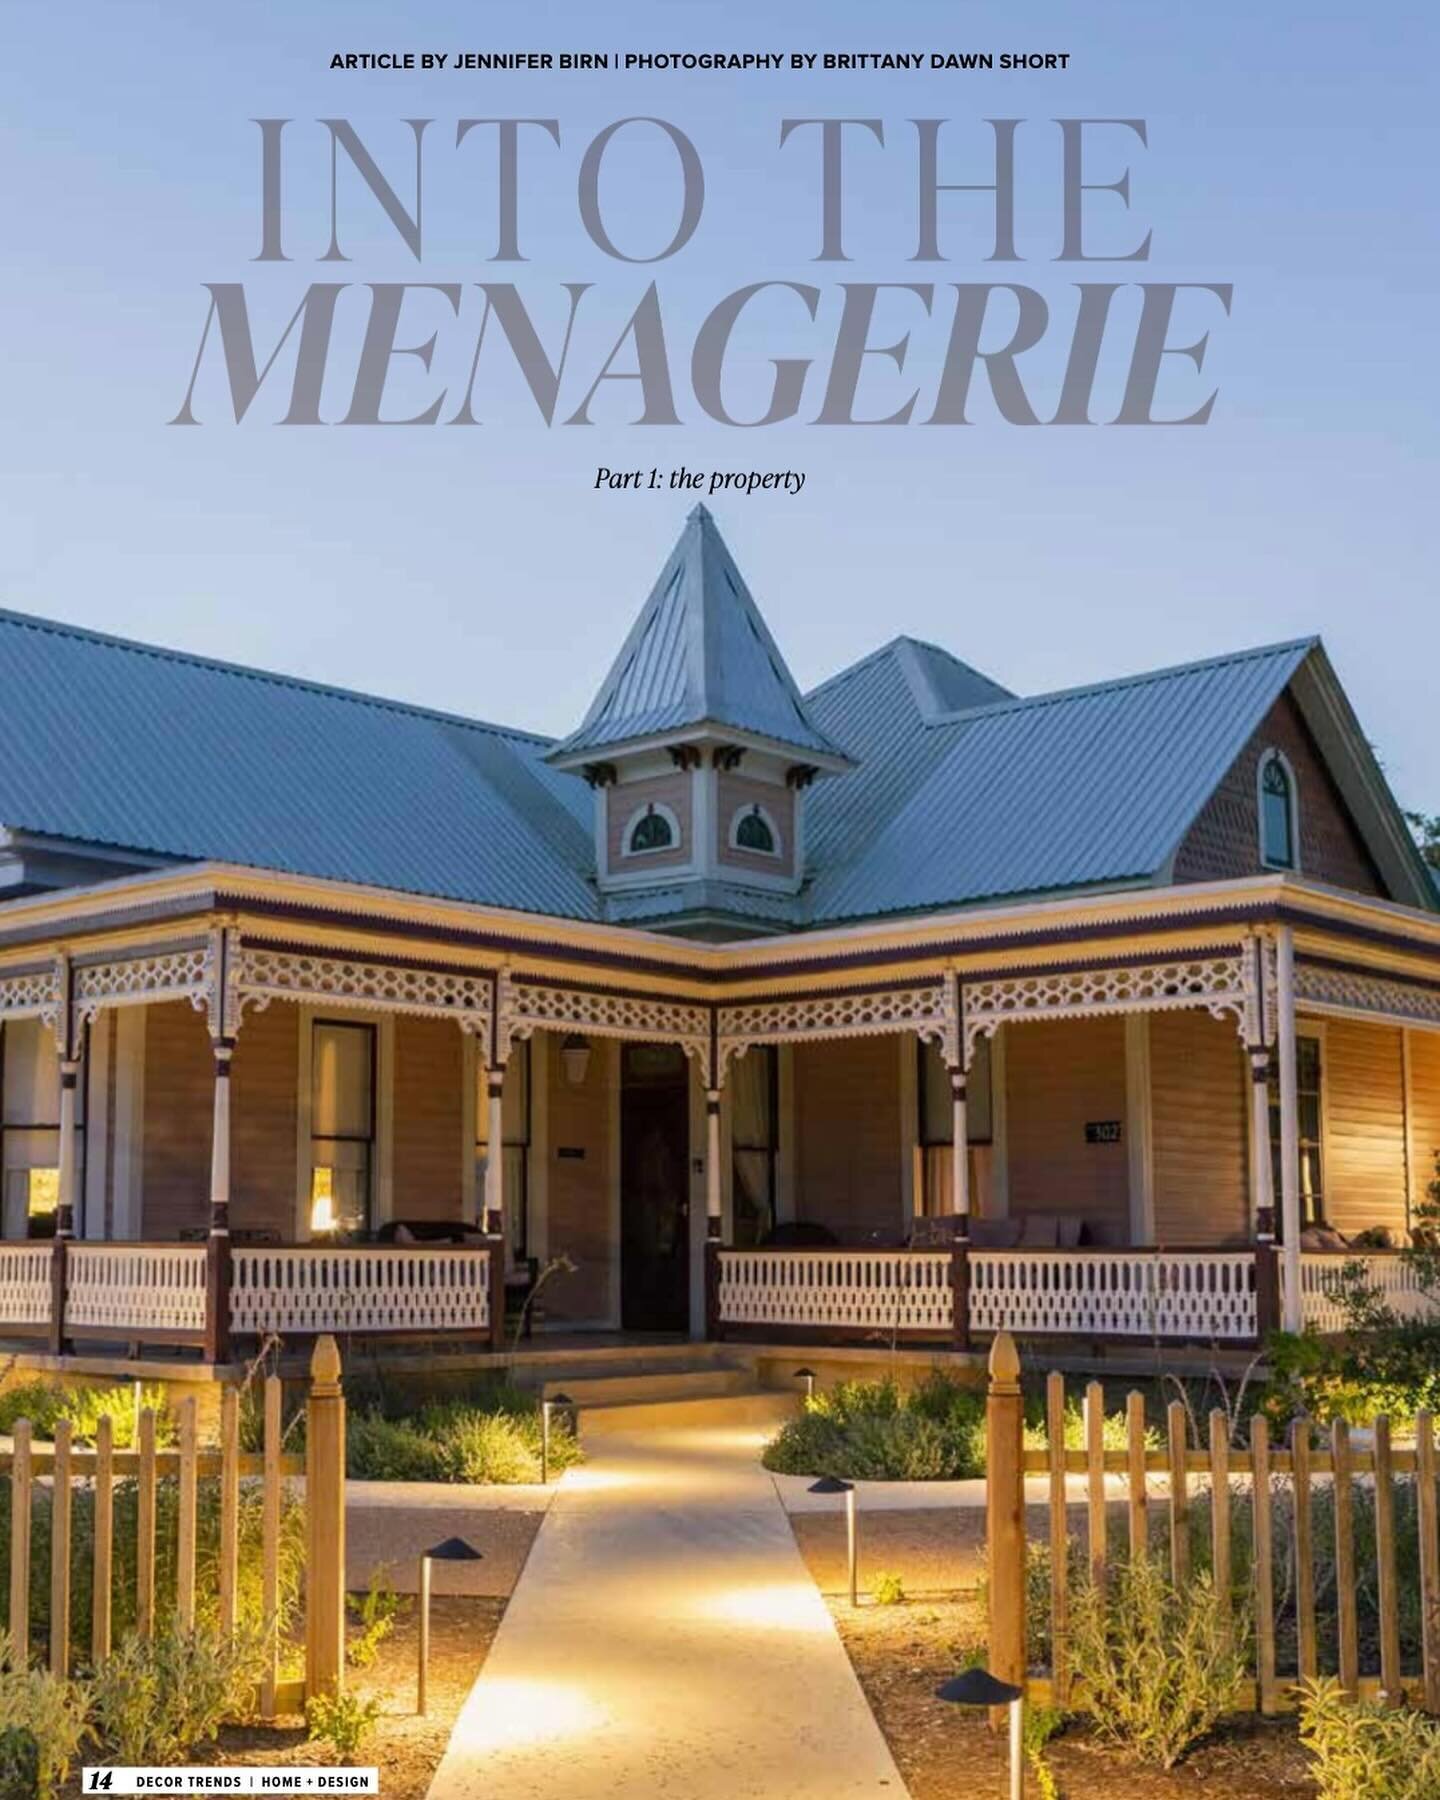 Our Fredericksburg hospitality project, The Menagerie, is featured on the cover of Austin Lifestyle&rsquo;s March issue! Head to our link in bio to check out the spread.